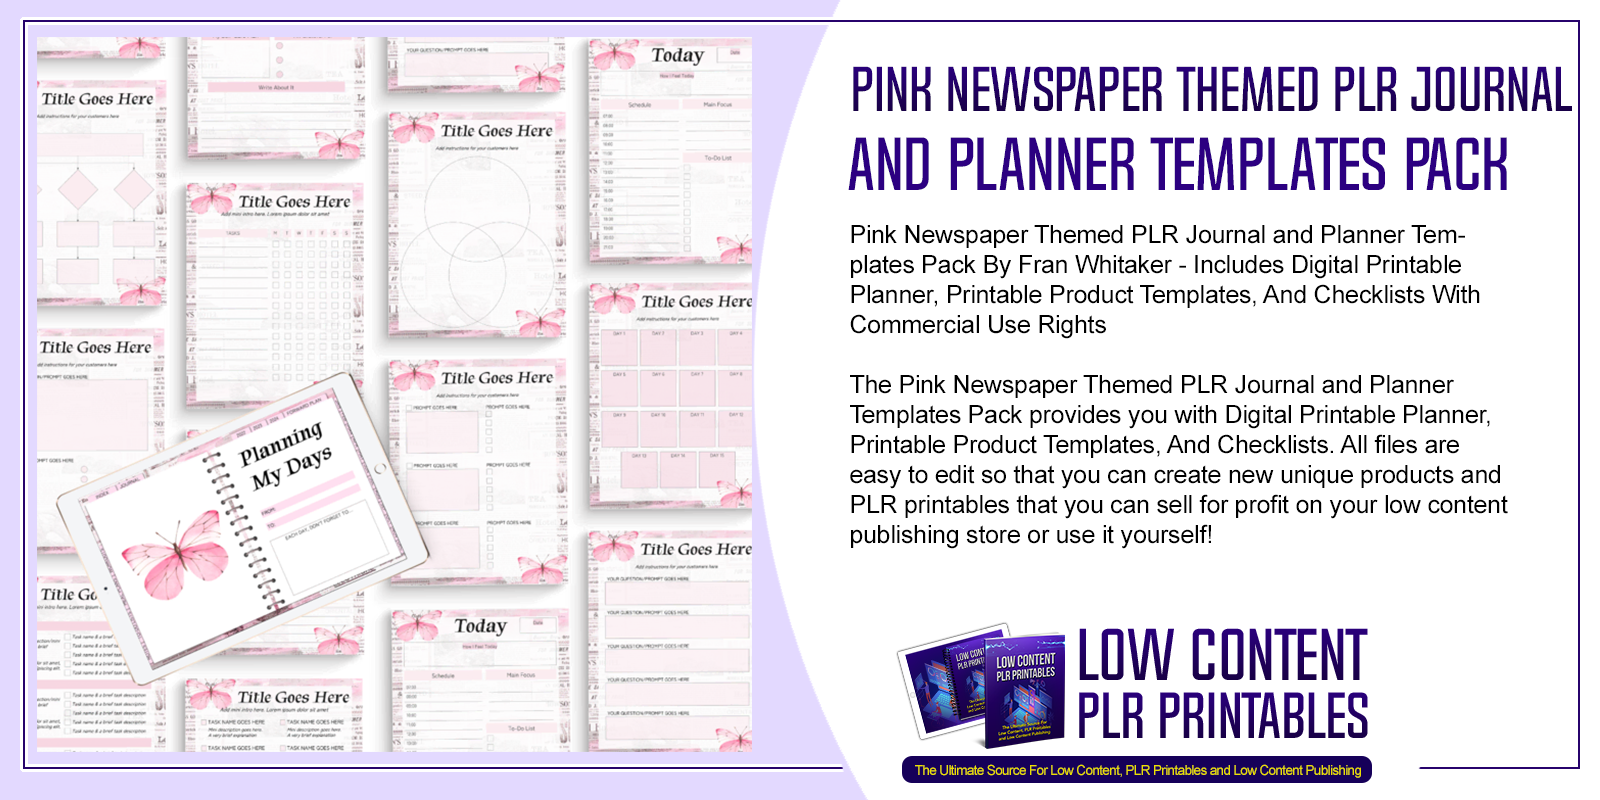 Pink Newspaper Themed PLR Journal and Planner Templates Pack